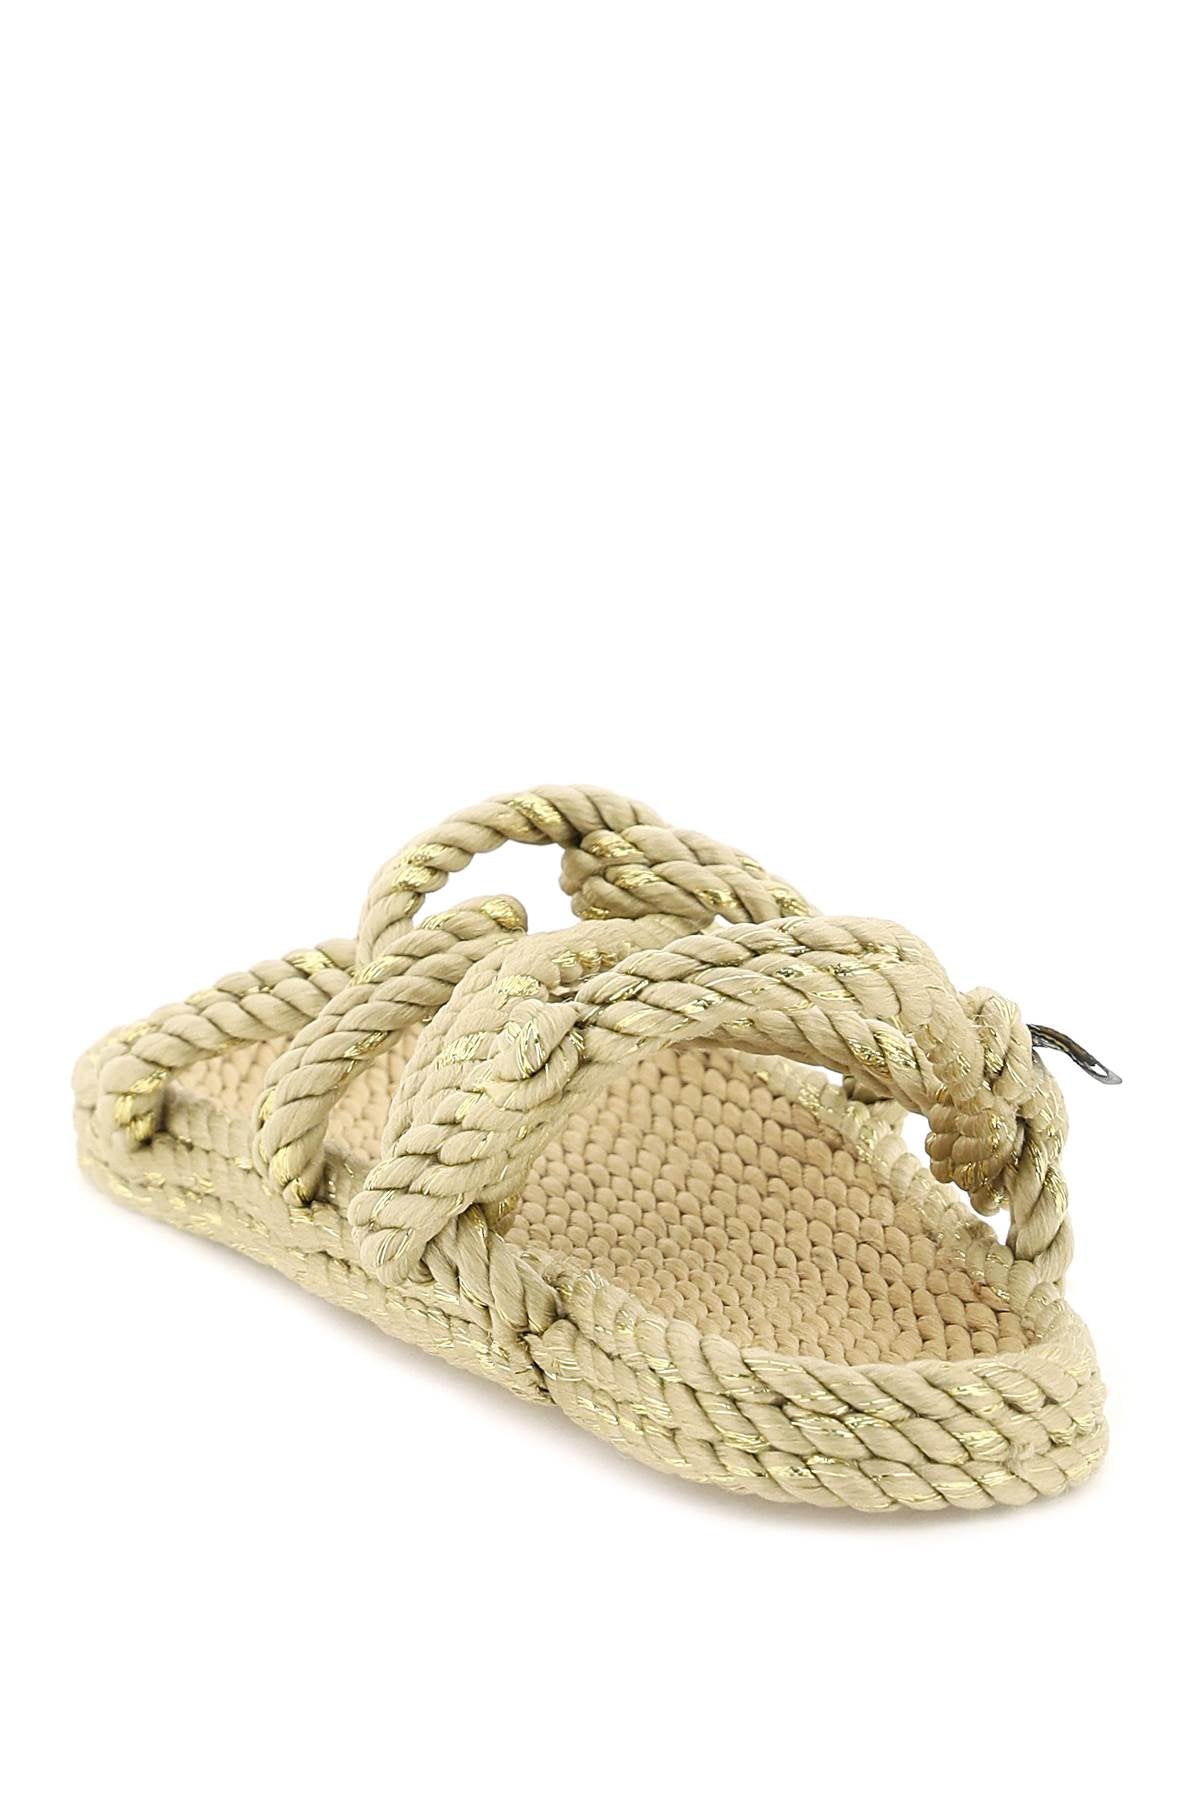 Nomadic State Of Mind Mountain Momma S Rope Sandals   Beige